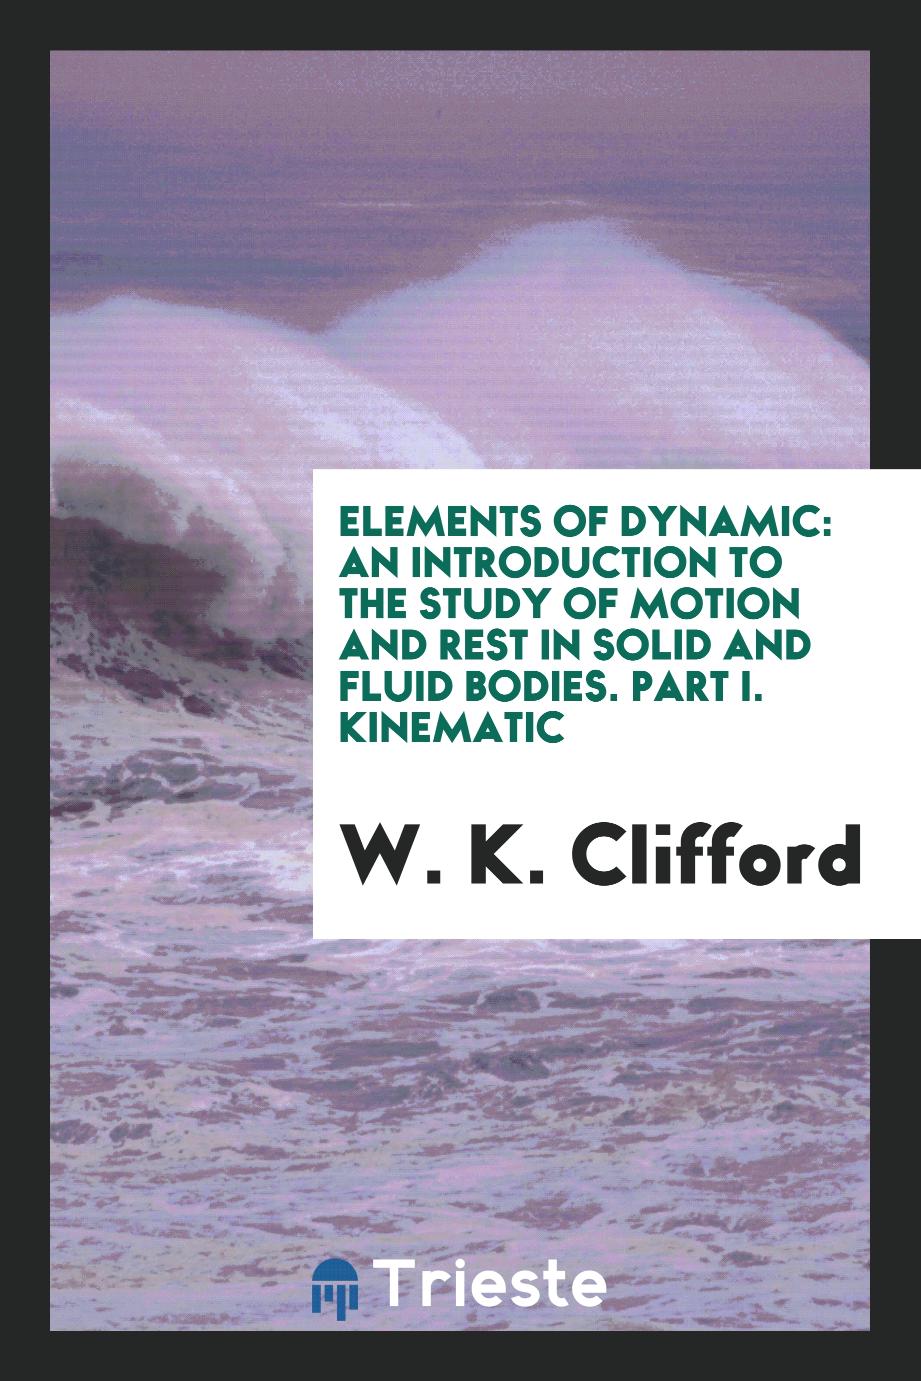 Elements of Dynamic: An Introduction to the Study of Motion and Rest in Solid and Fluid Bodies. Part I. Kinematic